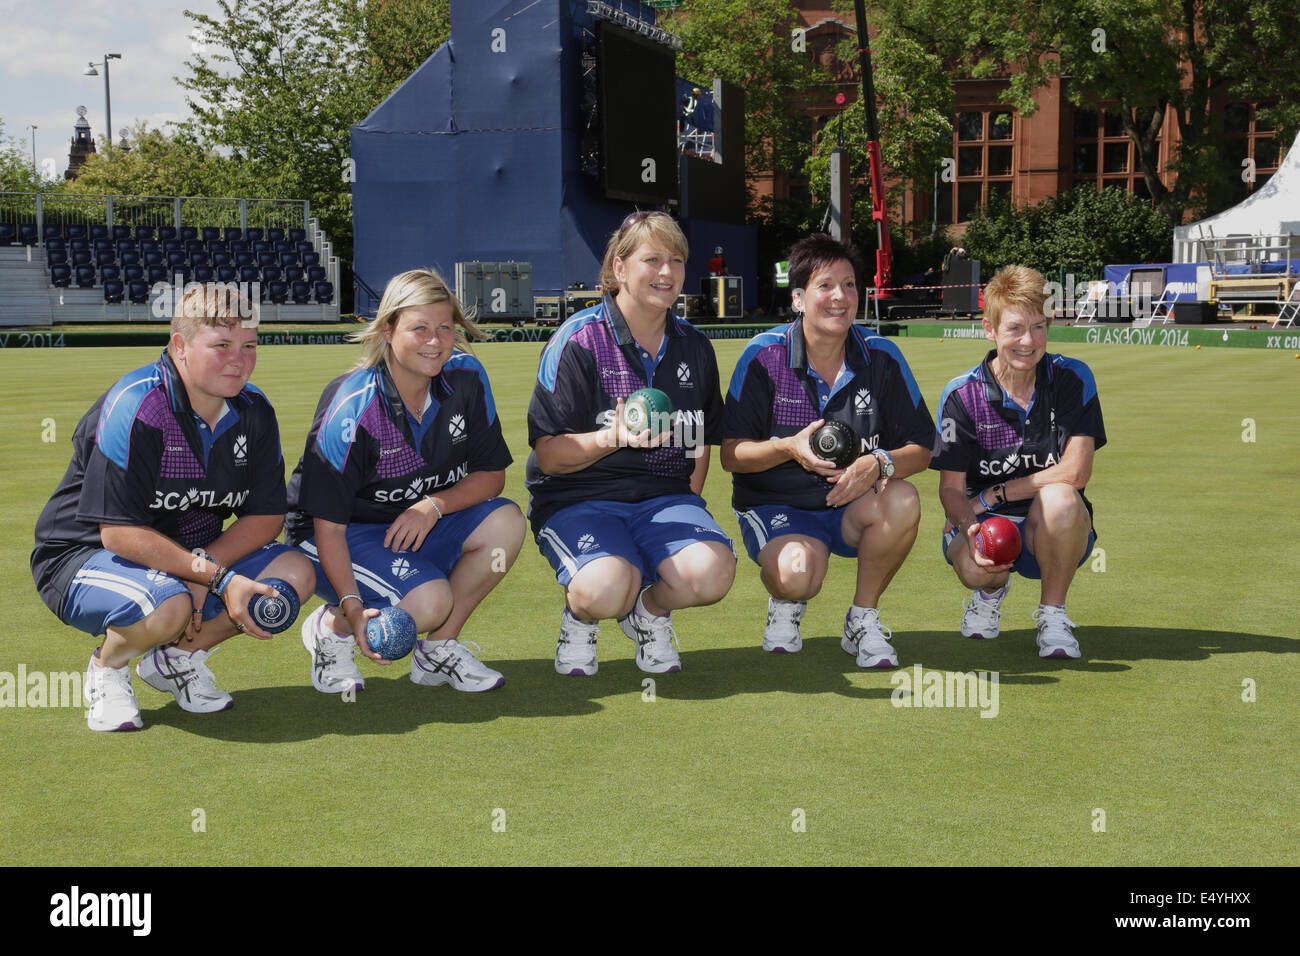 Kelvingrove Lawn Bowls Centre, Glasgow, Scotland, UK, Thursday, 17th July, 2014. Team Scotland Women's Team in the venue for the 2014 Commonwealth Games Lawn Bowls Competition, left to right, Lauren Baillie, Claire Johnston, Caroline Brown, Lorraine Malloy, Margaret Letham Stock Photo